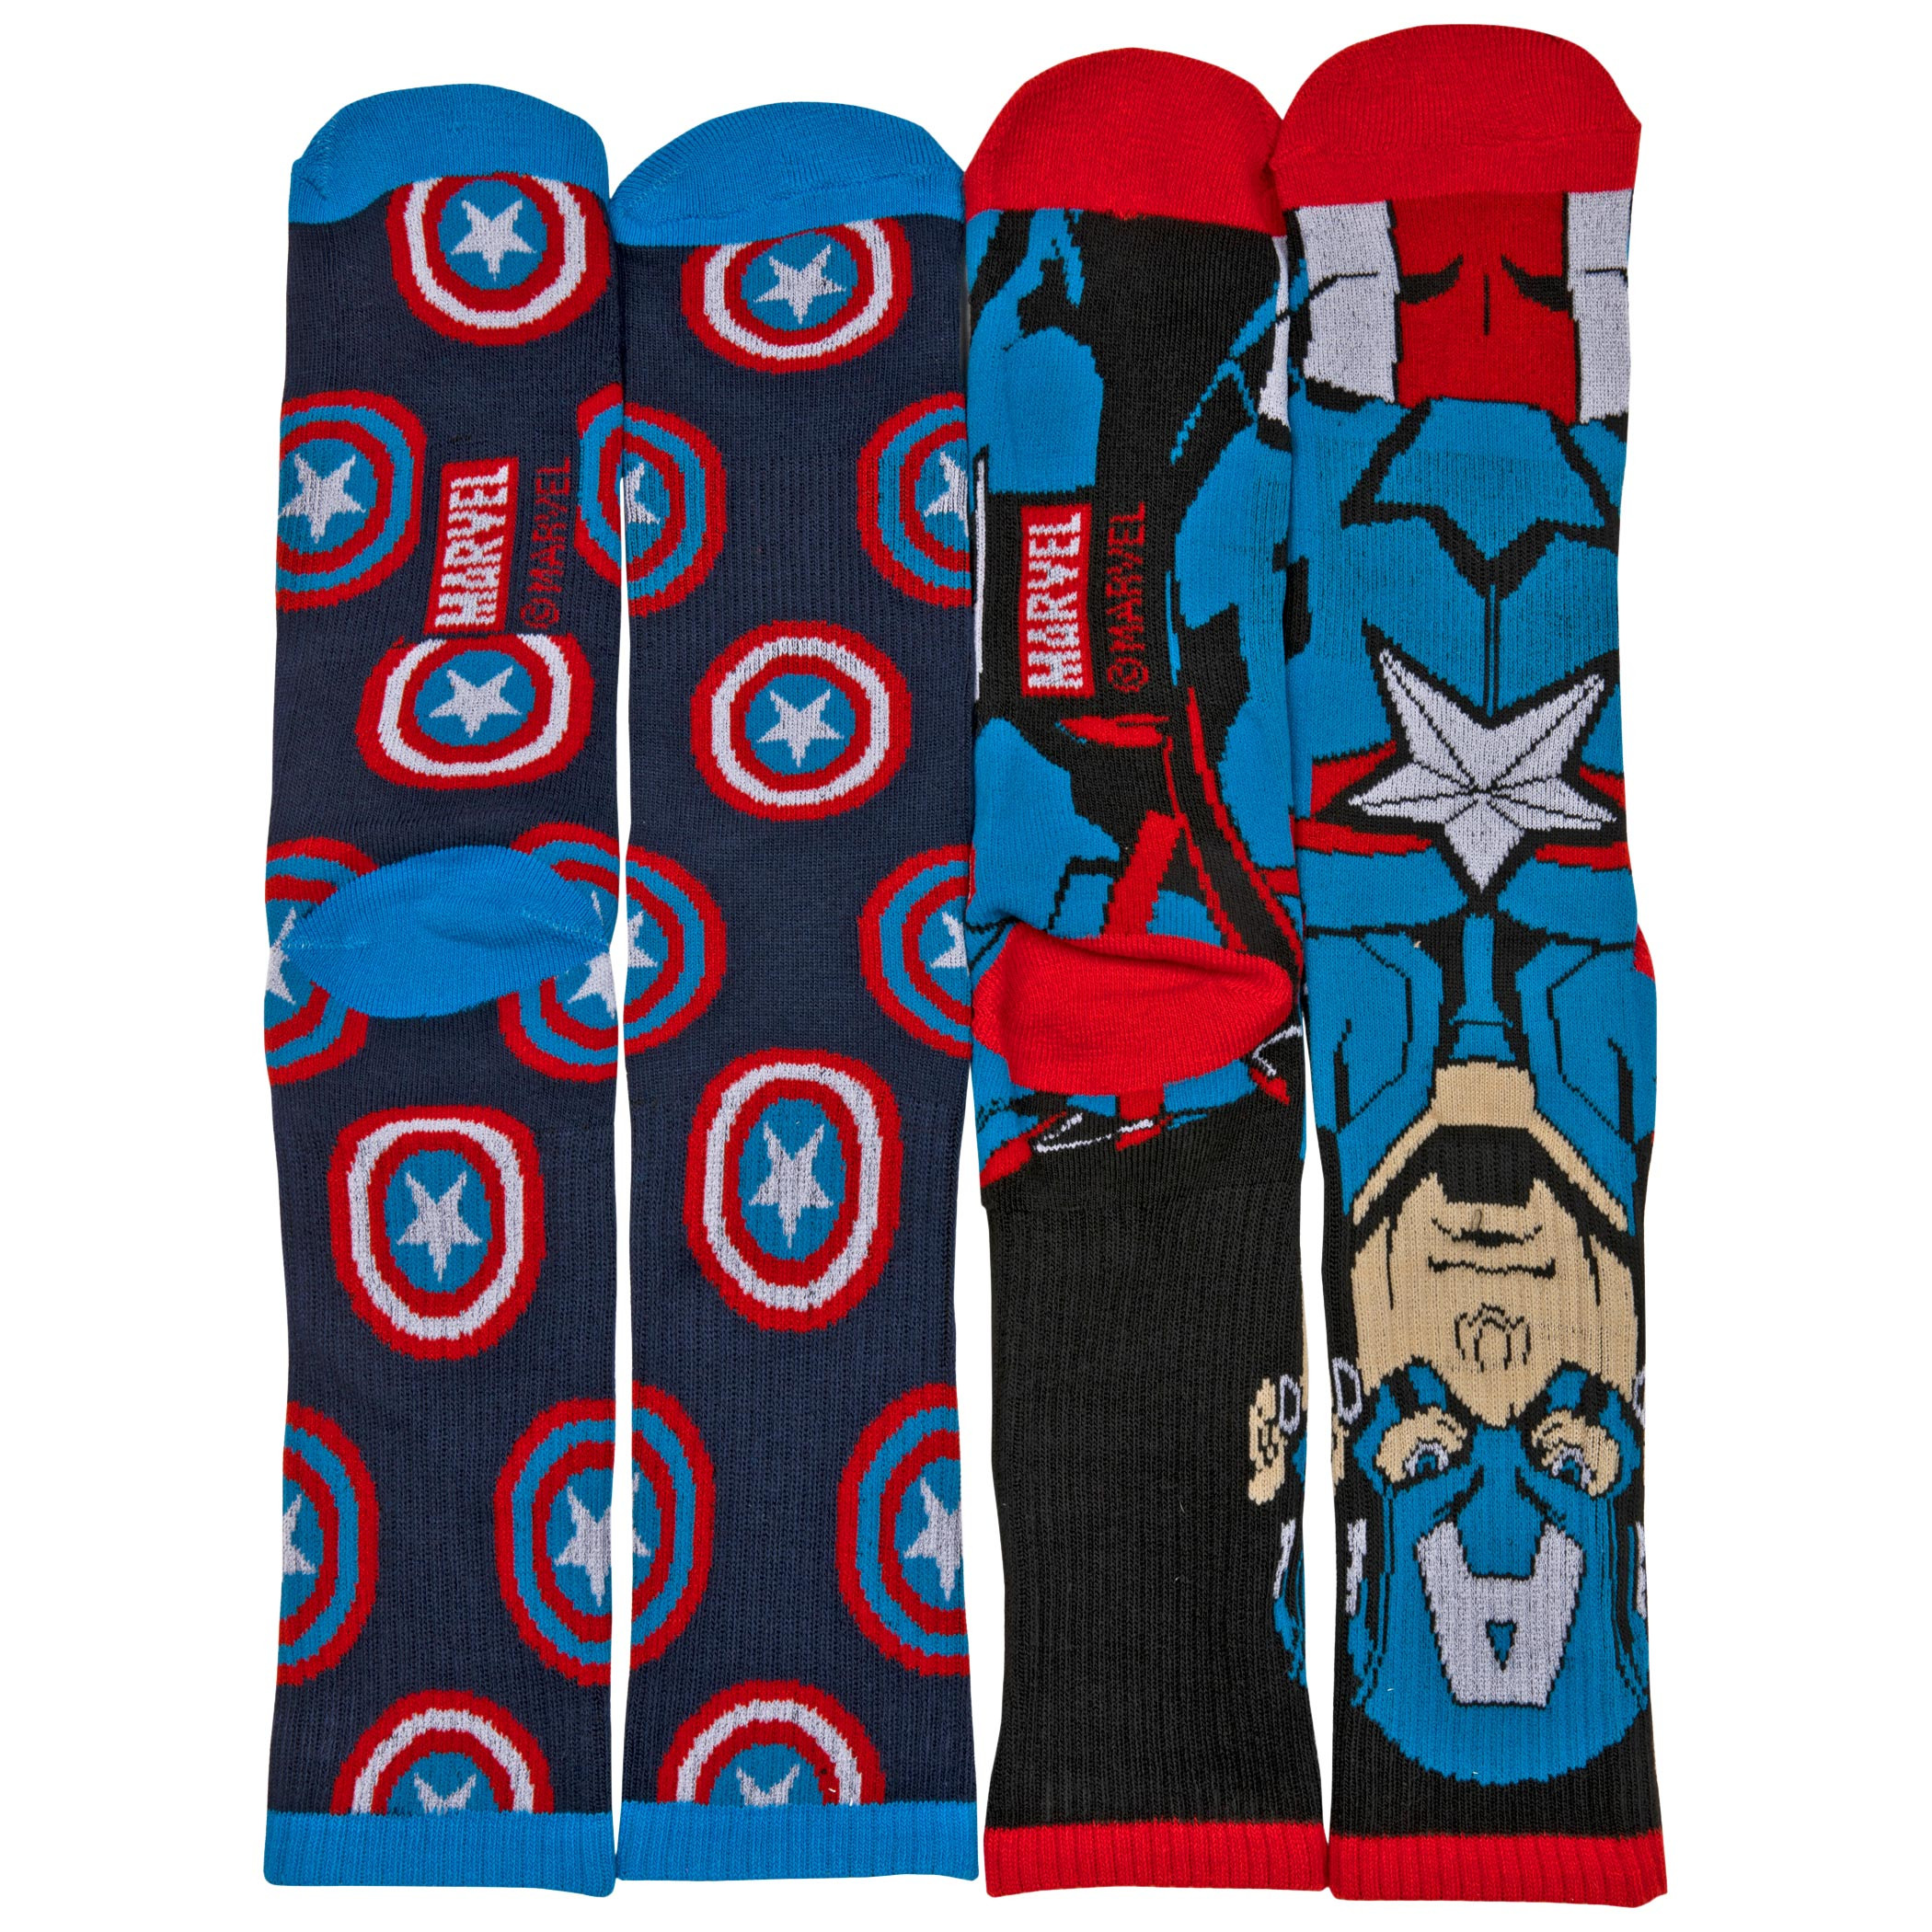 Captain America Character and Shield Symbols 2-Pair Pack of Athletic Socks